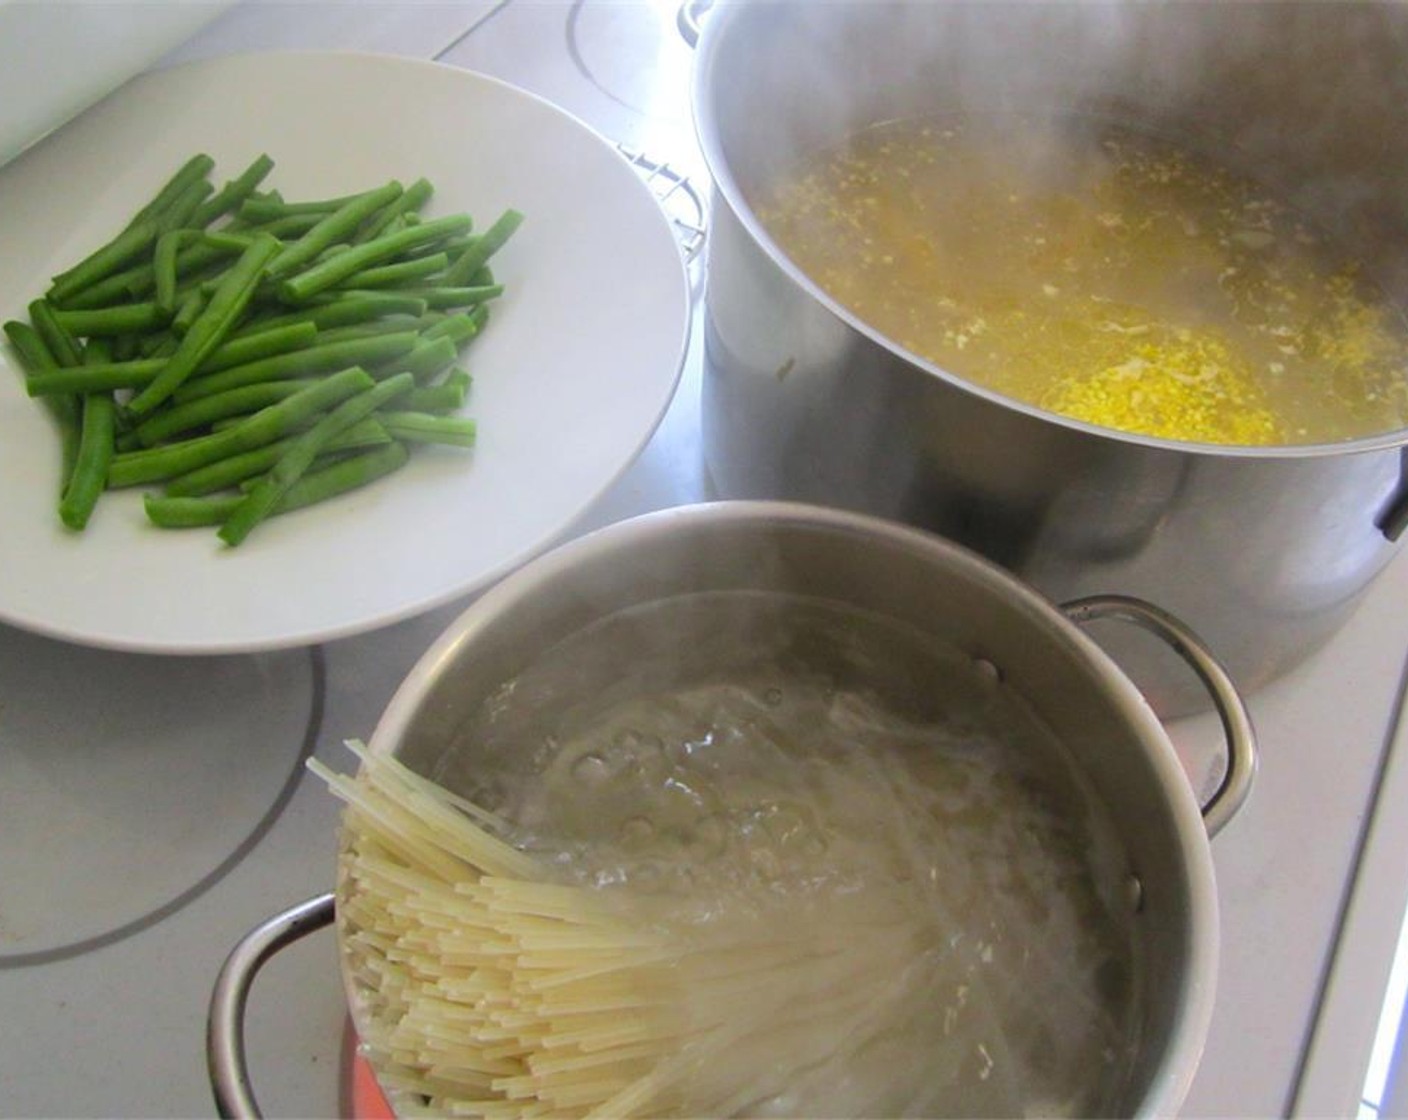 step 2 Meanwhile, blanch Green Beans (2 cups) and cook rice flour bucatini (2 handful).